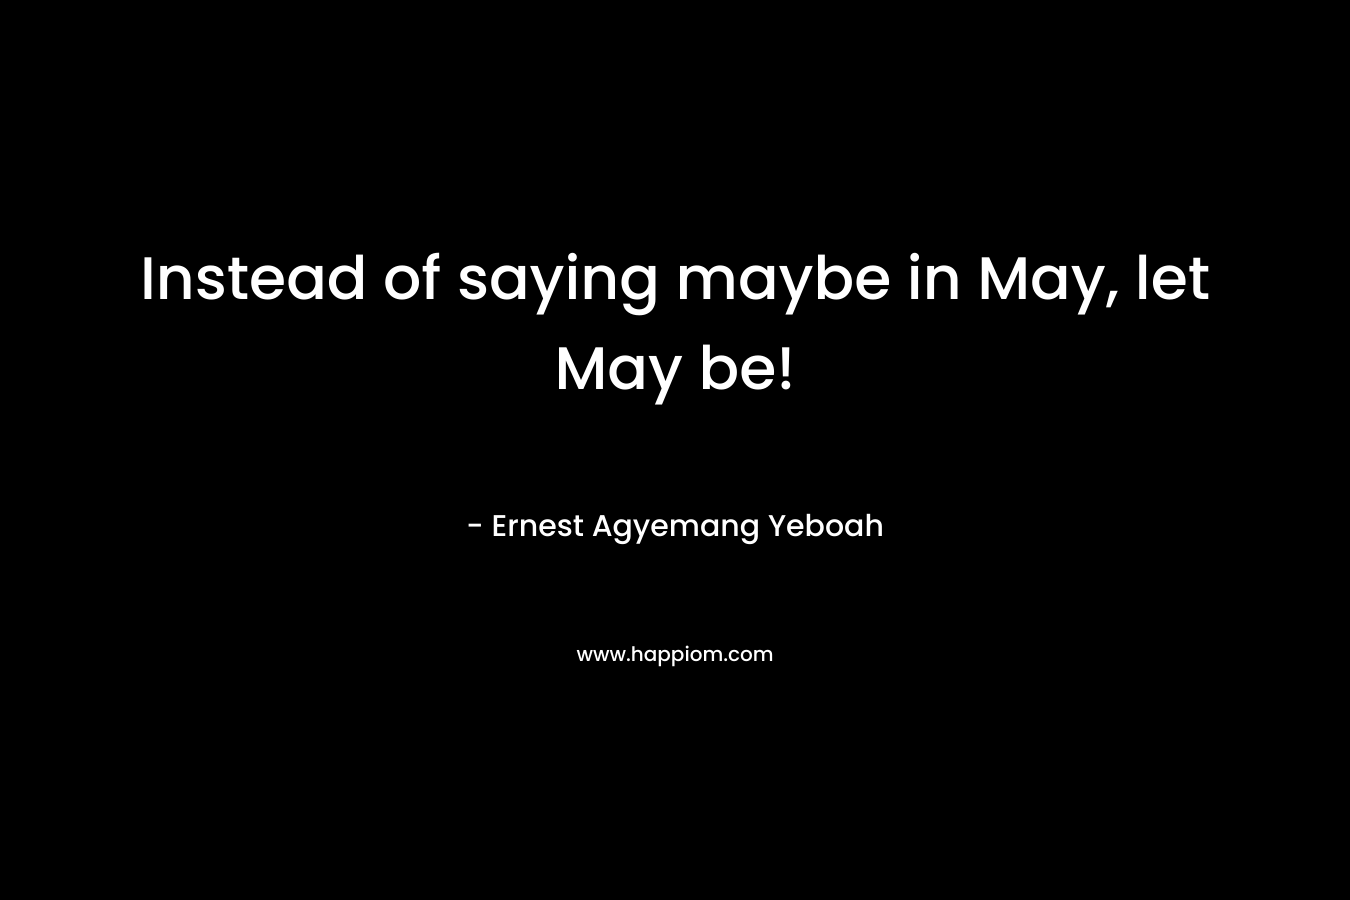 Instead of saying maybe in May, let May be!